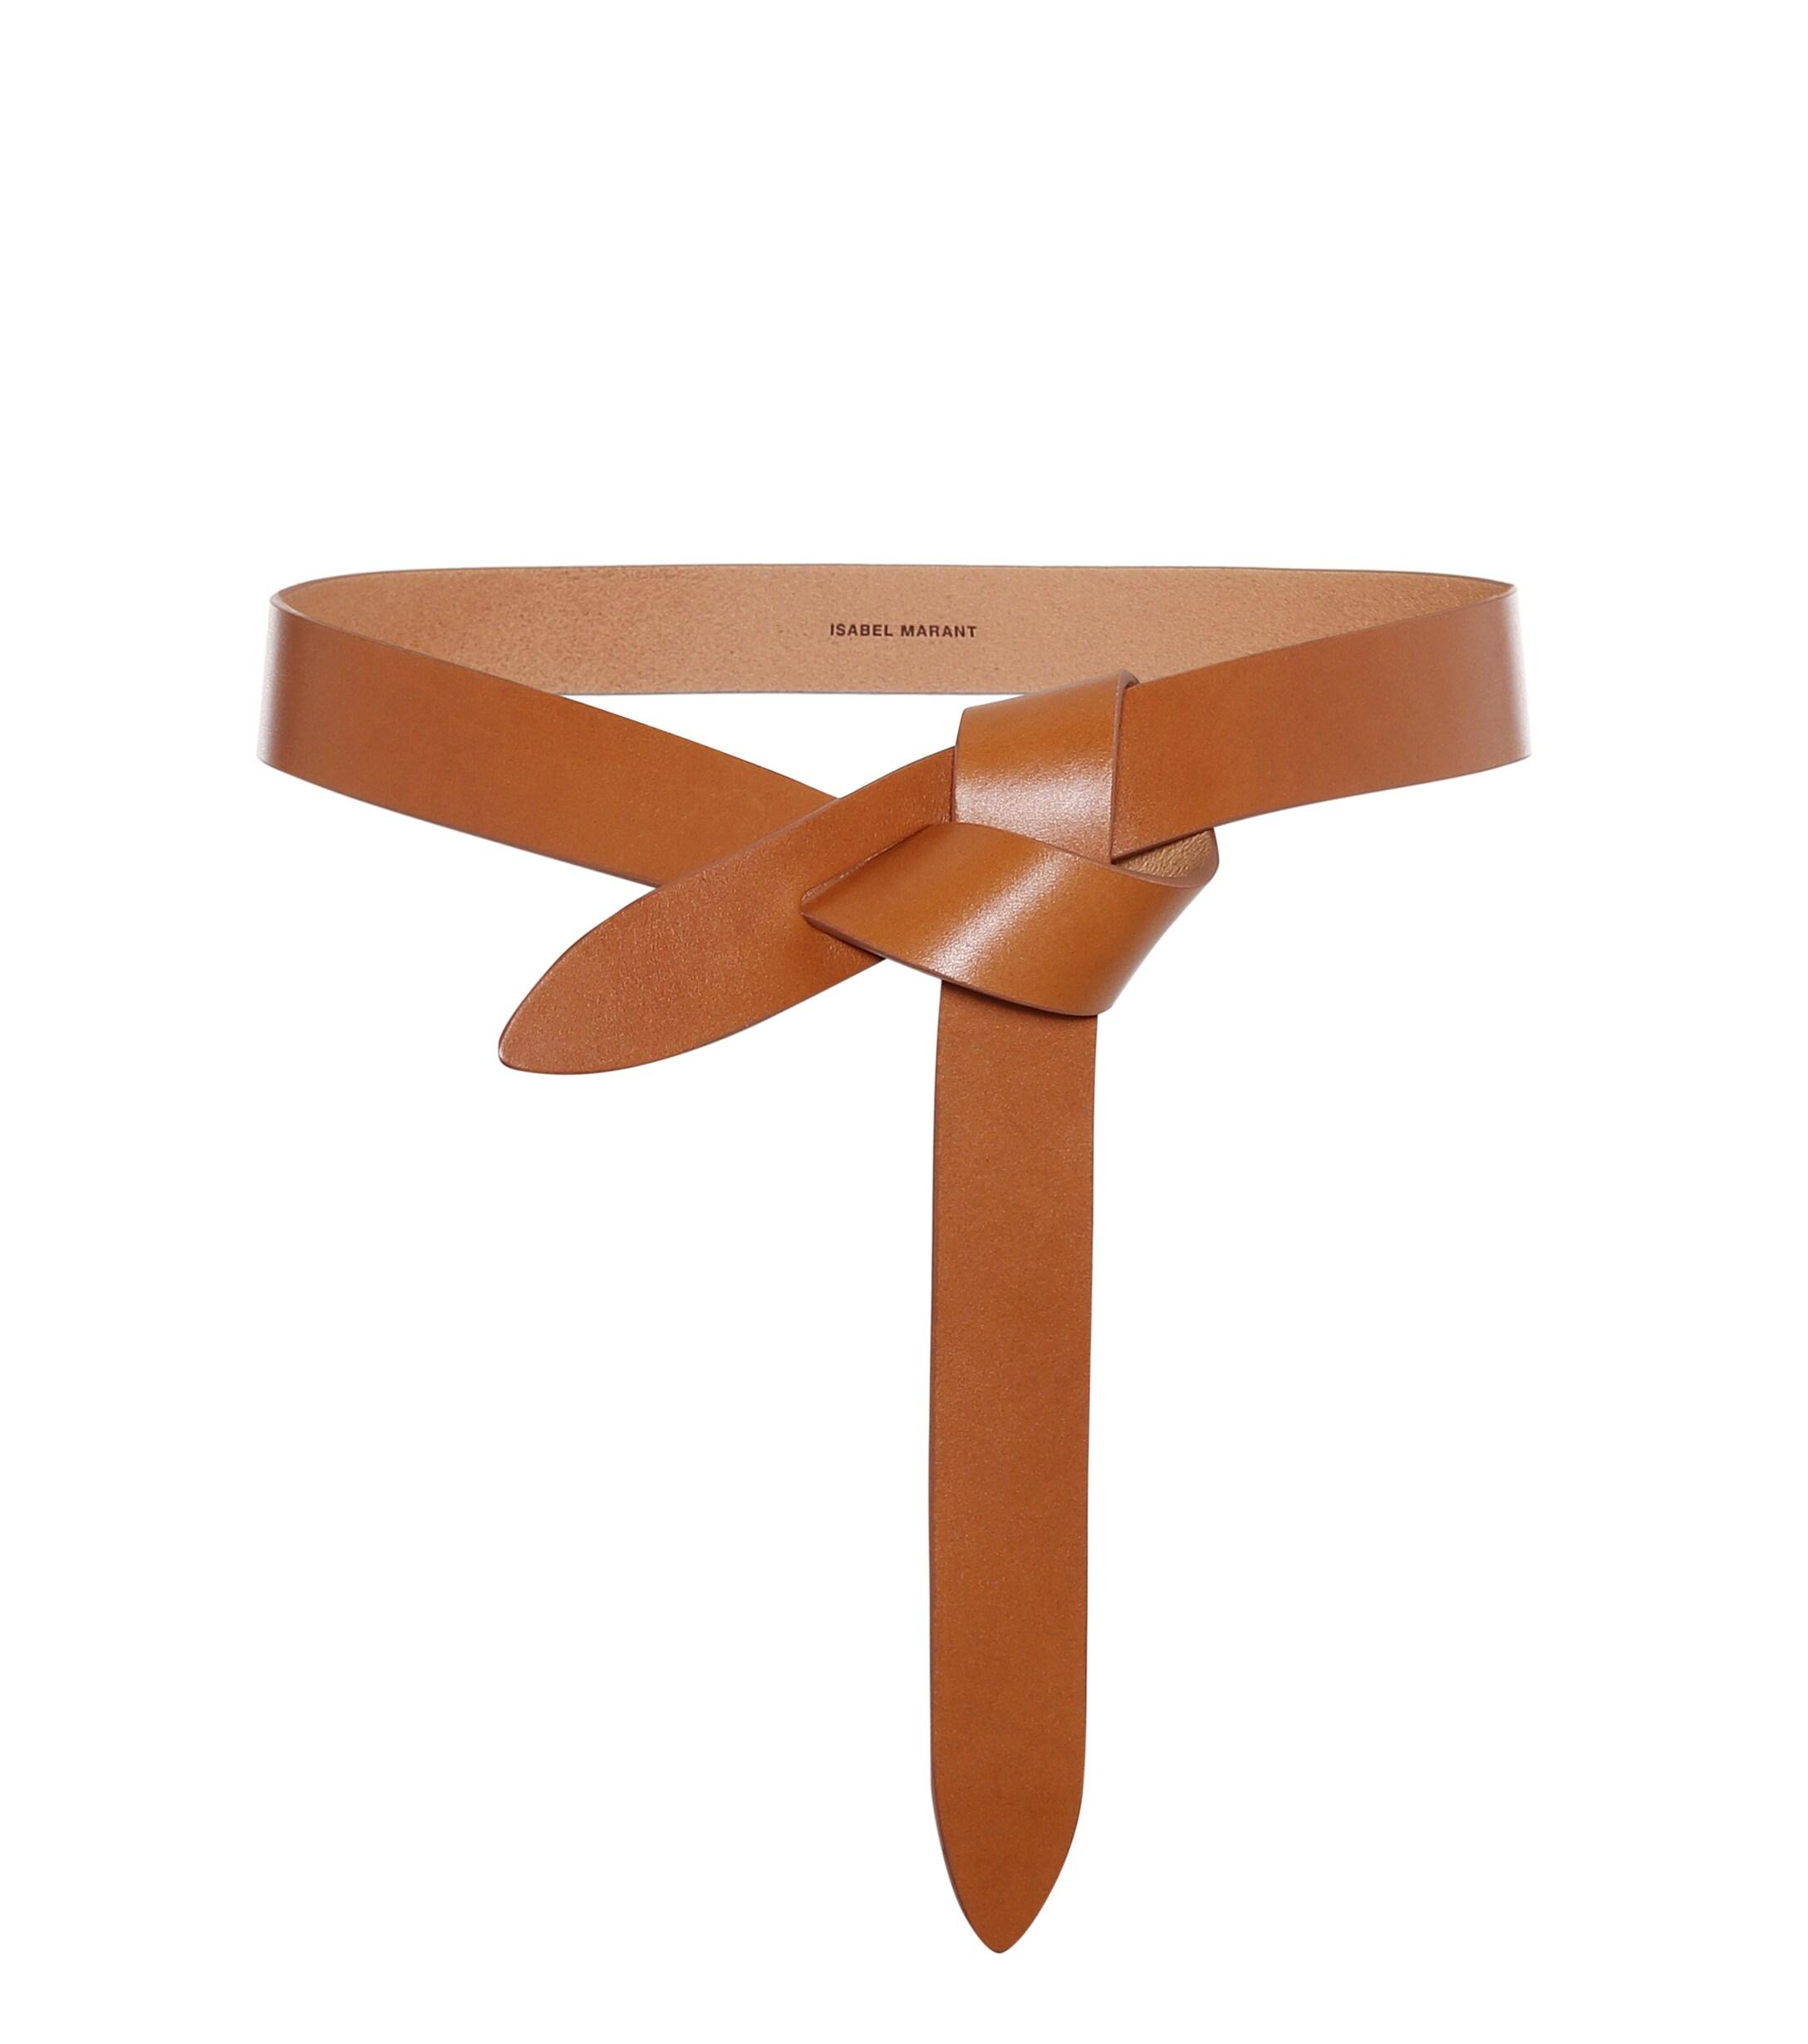 Isabel Marant Lecce Leather Belt in Brown - Lyst